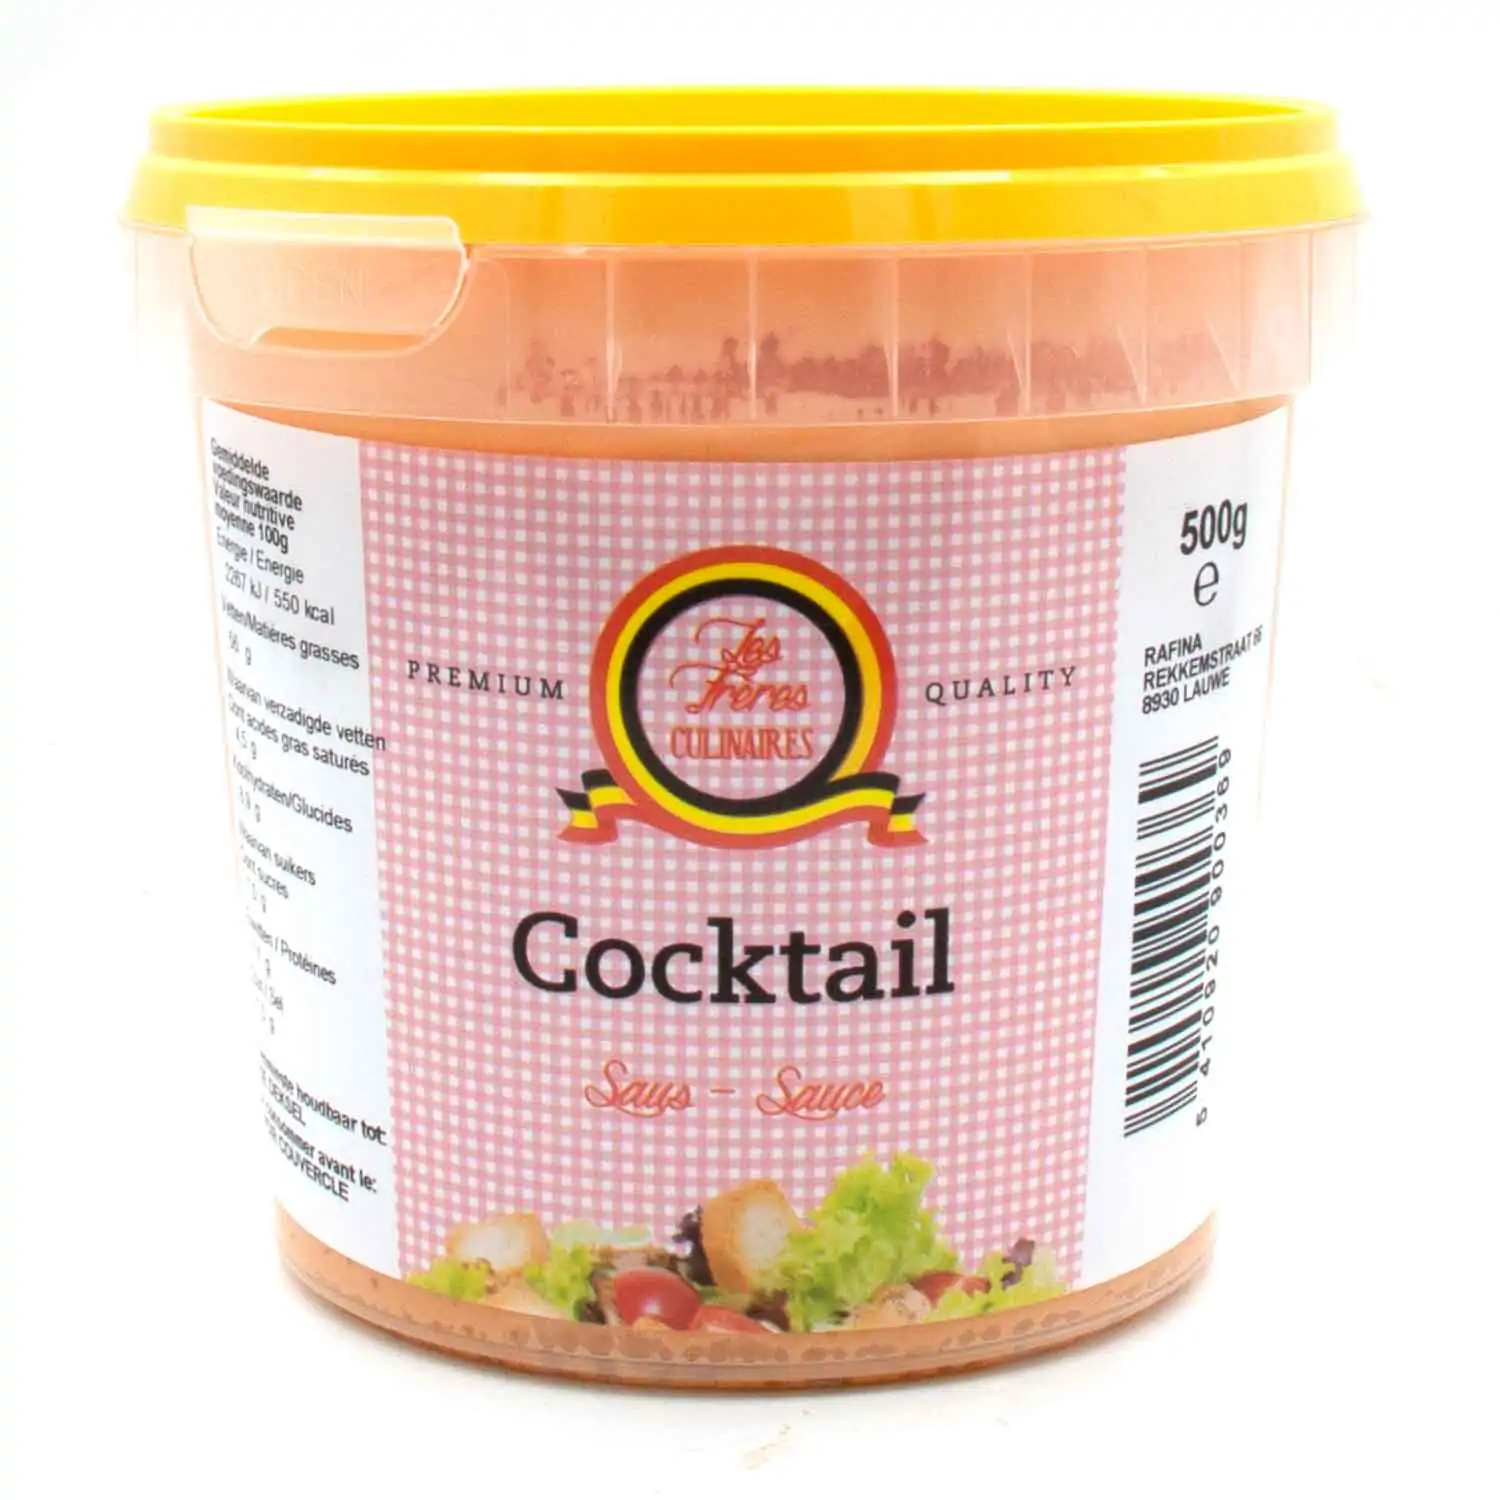 Les Frères Culinaires cocktail 500g - Buy at Real Tobacco